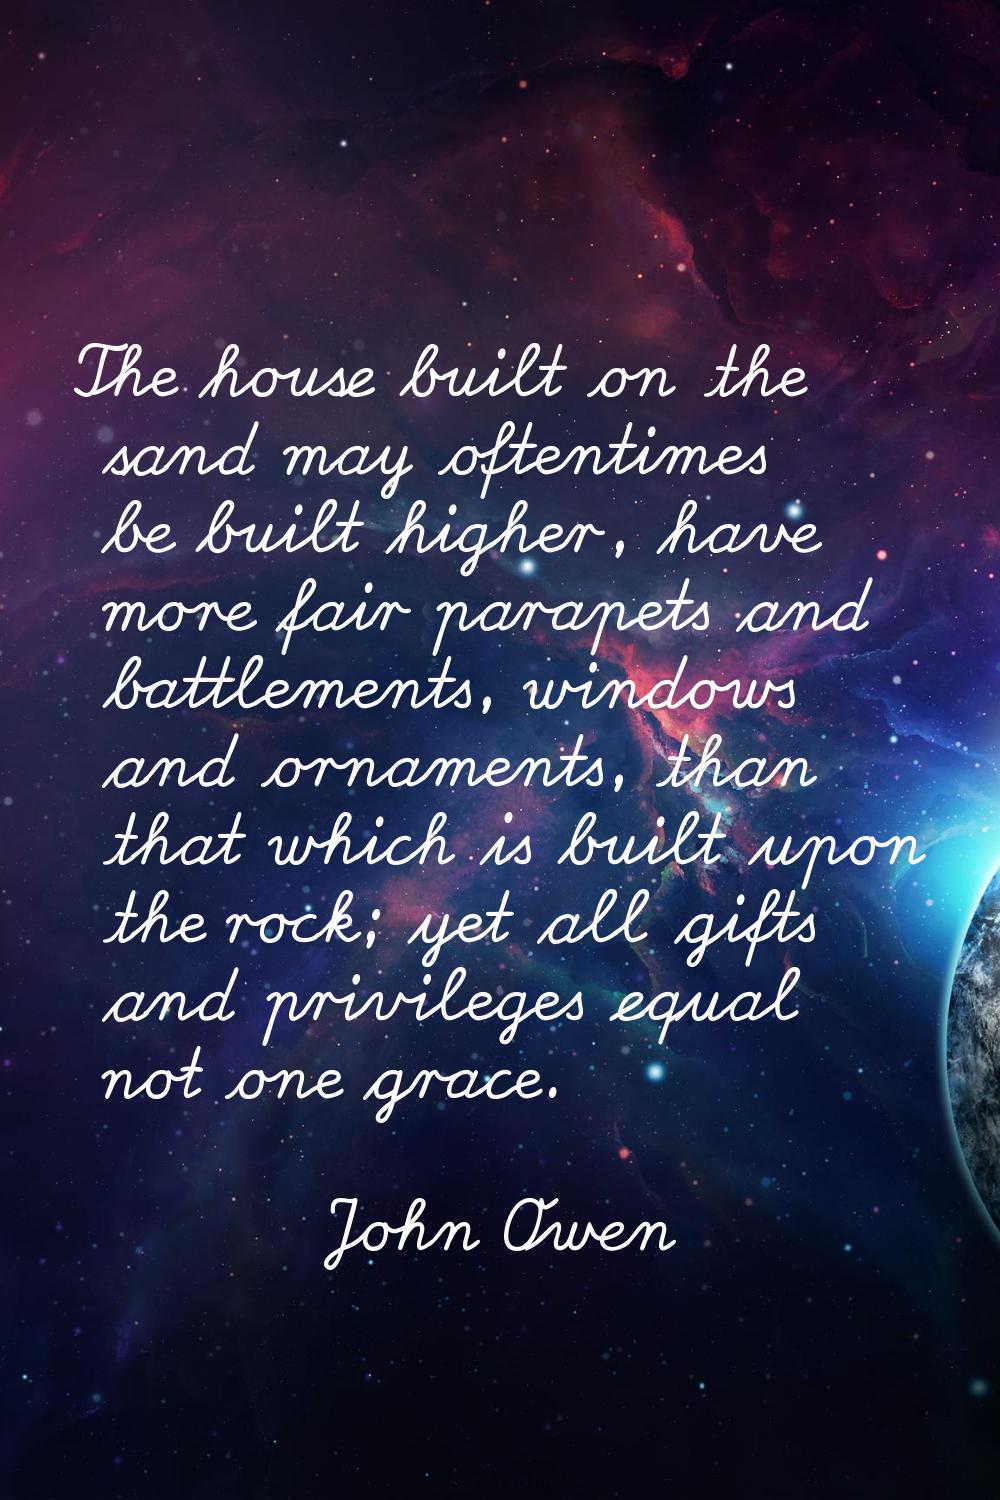 The house built on the sand may oftentimes be built higher, have more fair parapets and battlements